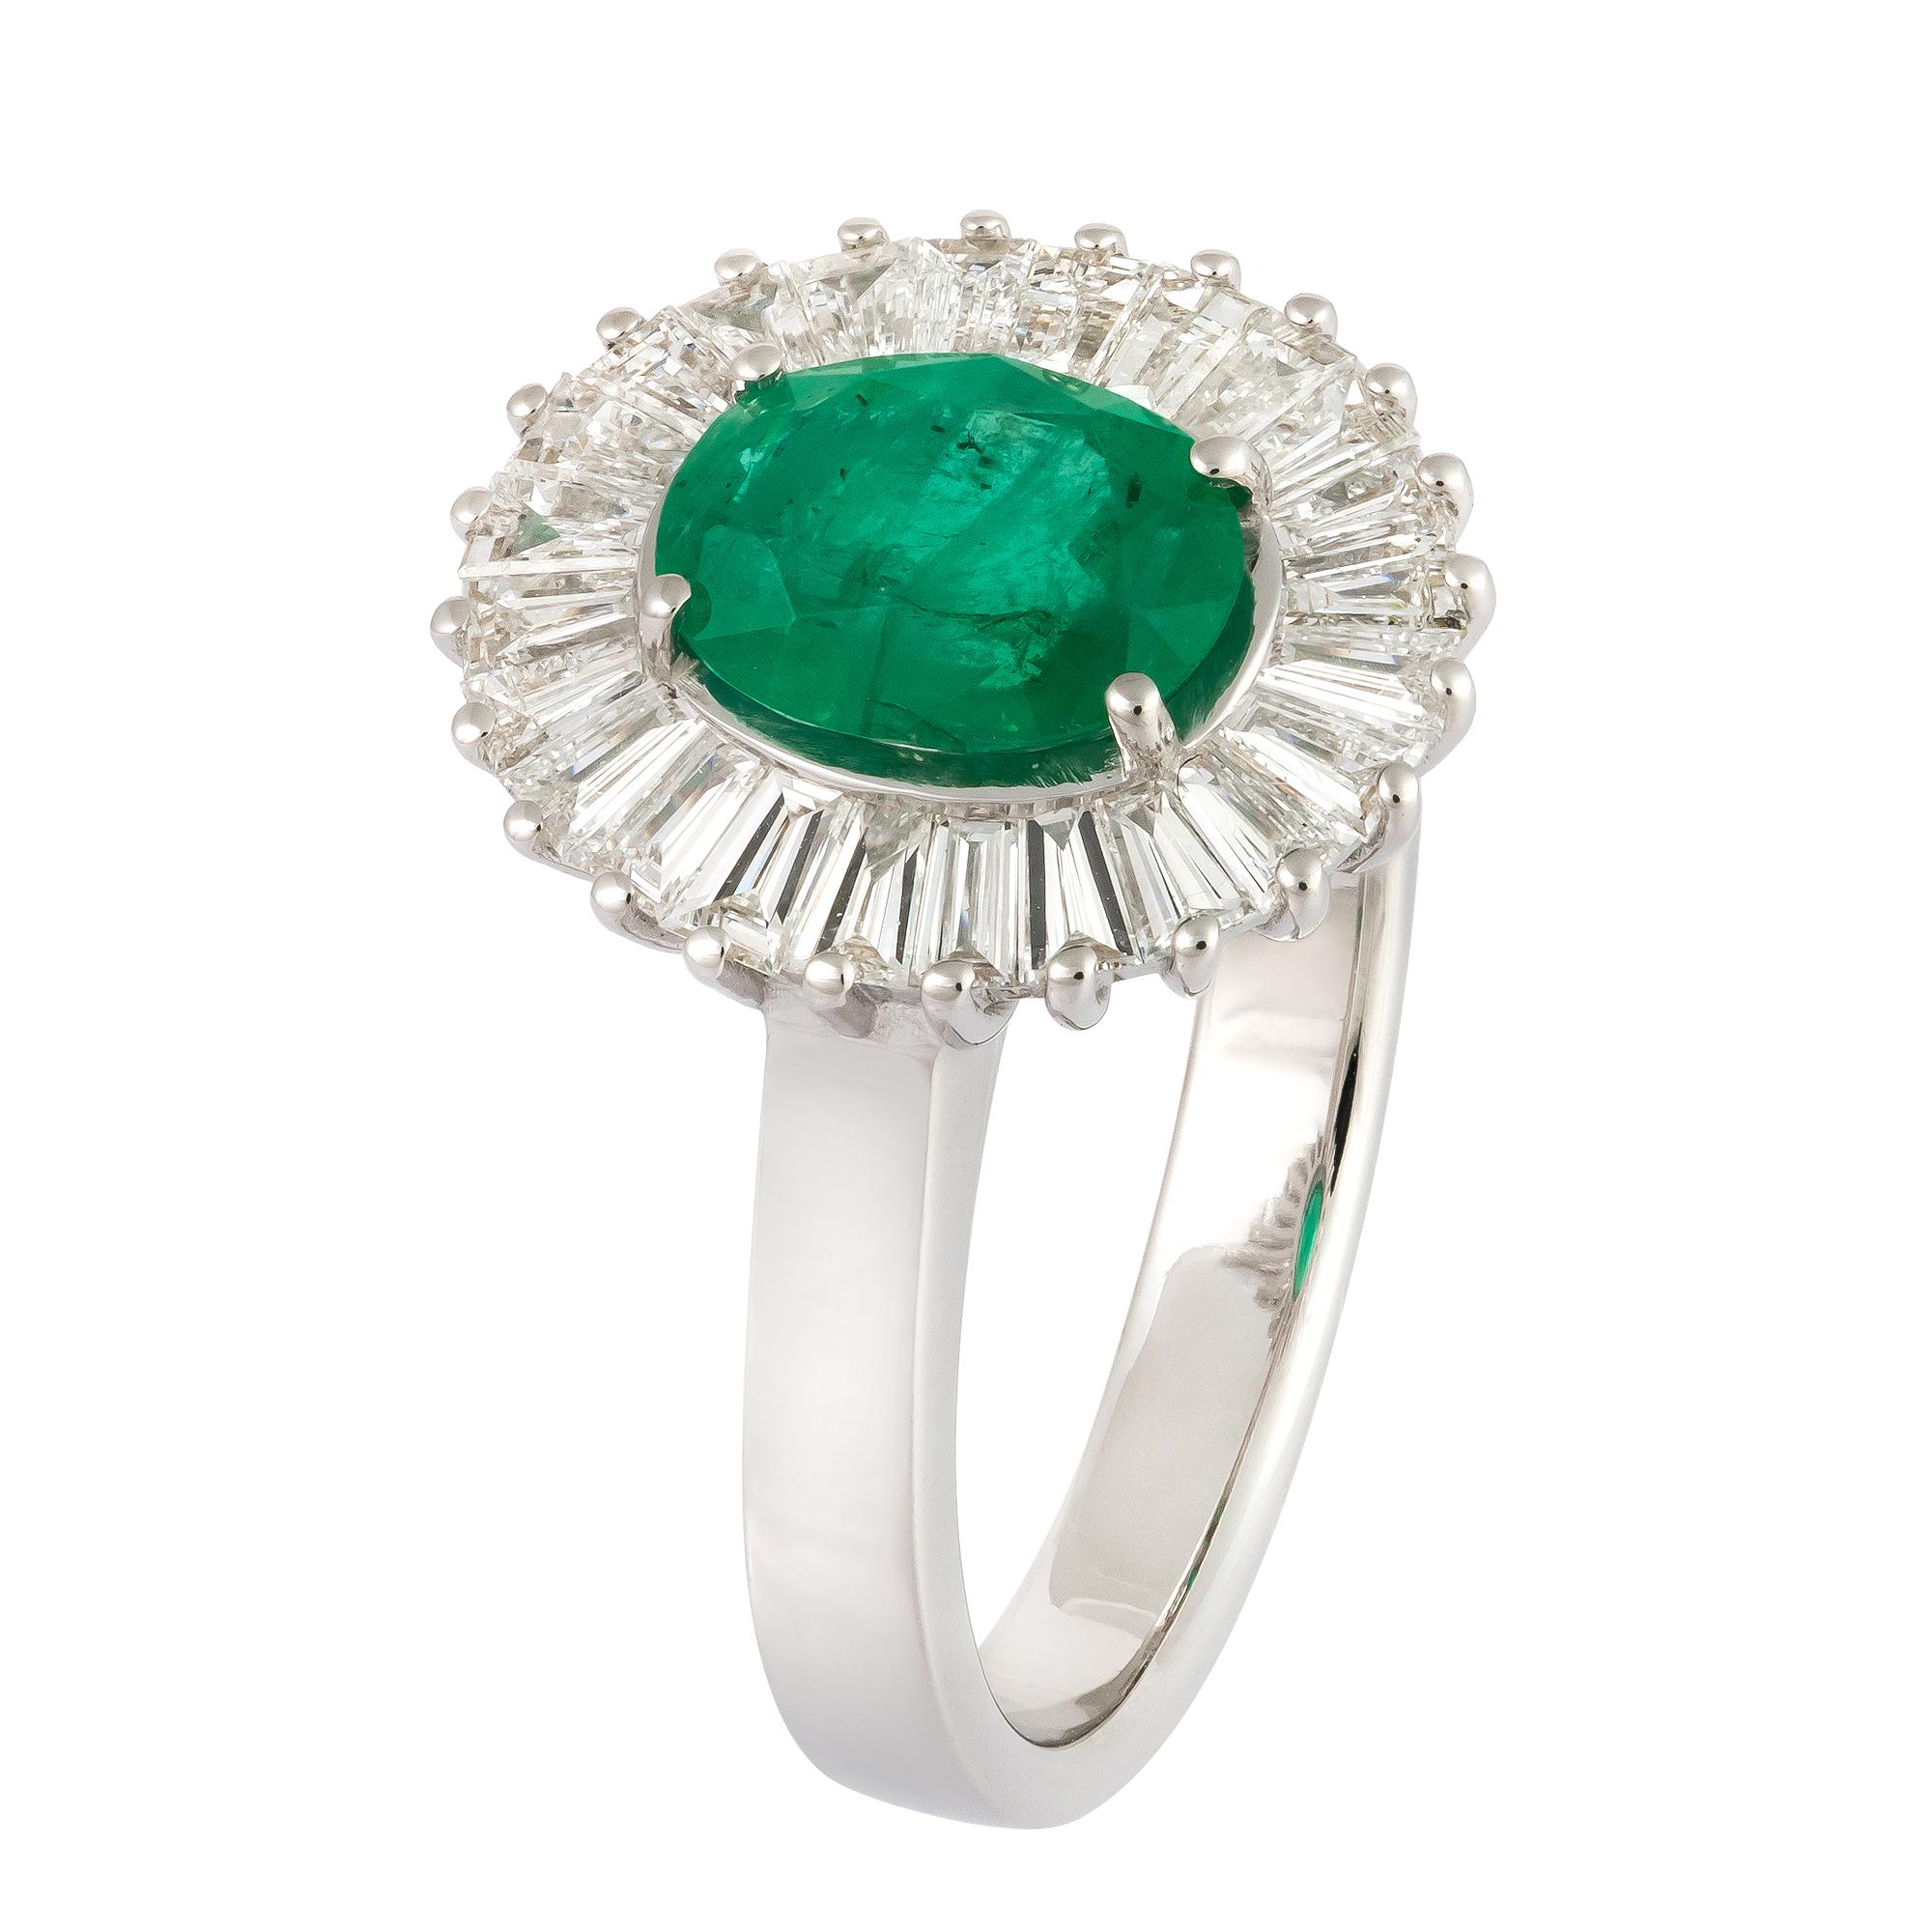 The Following Item we are offering is this Rare Important Radiant 18KT Gold Gorgeous Glittering and Sparkling Magnificent Fancy Oval Shaped Green Emerald and Fancy Trillion Baguette Diamond Ring. Ring Contains approx 2CTS of Beautiful Fancy Oval Cut